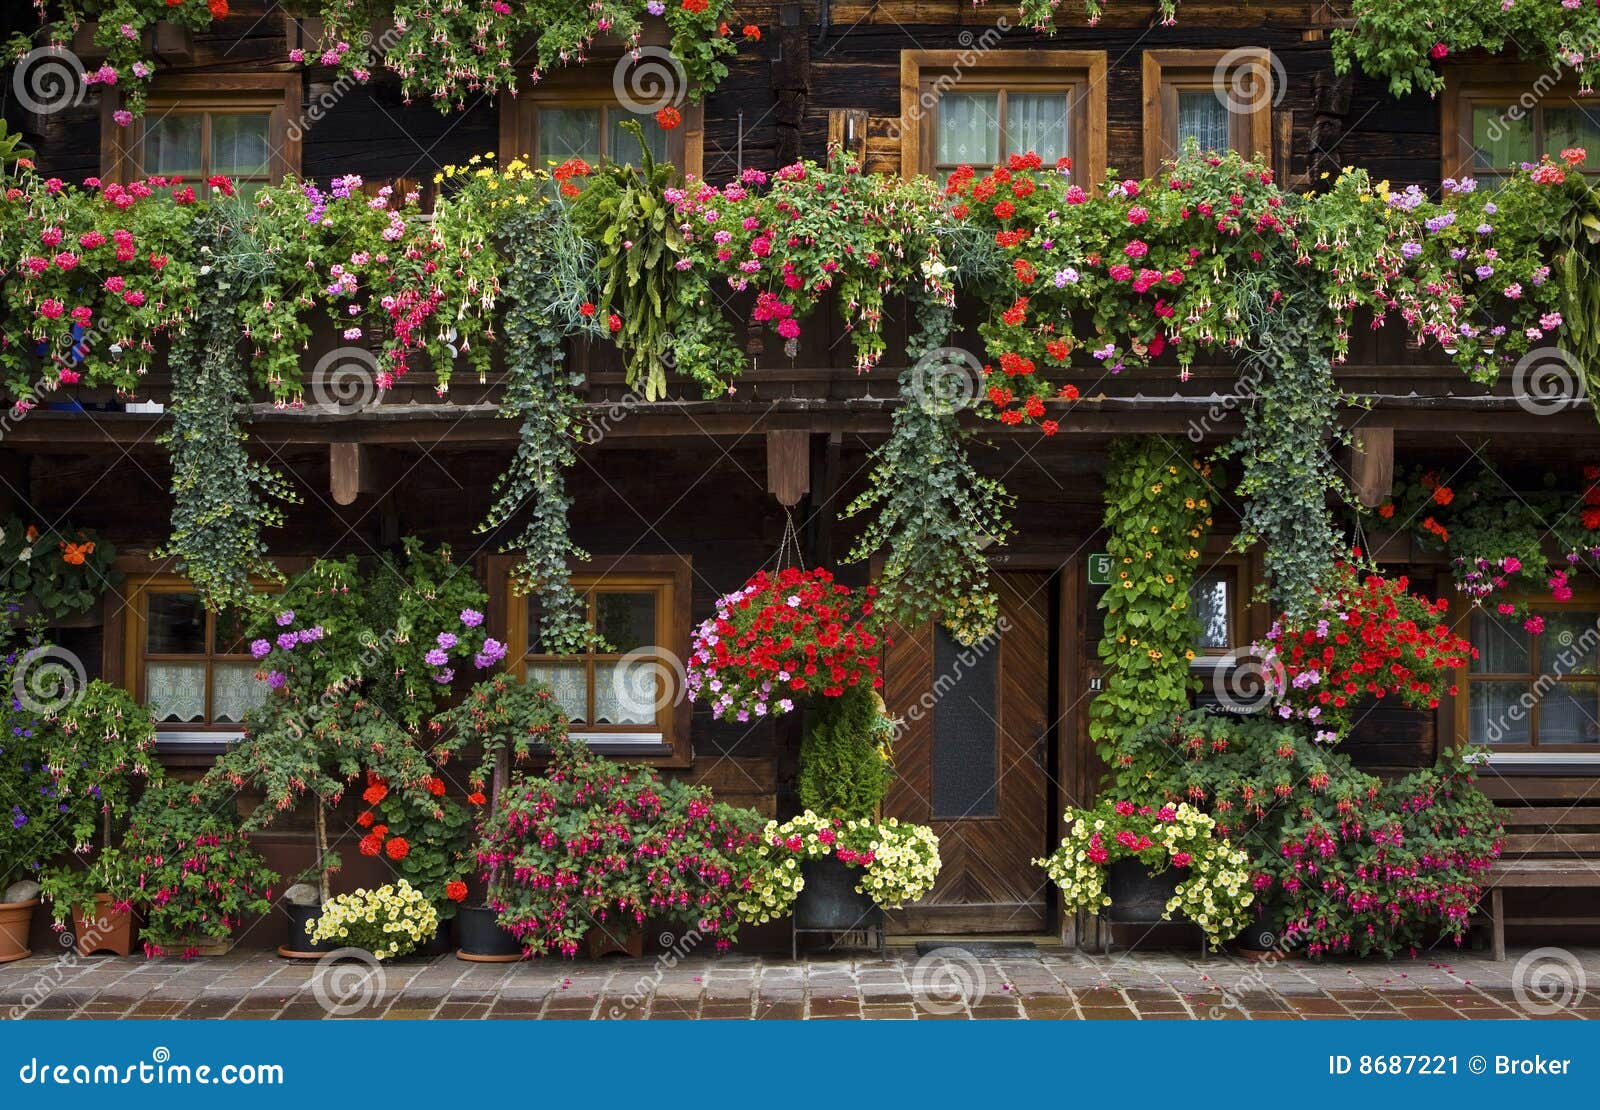 typical floral adornments in austria